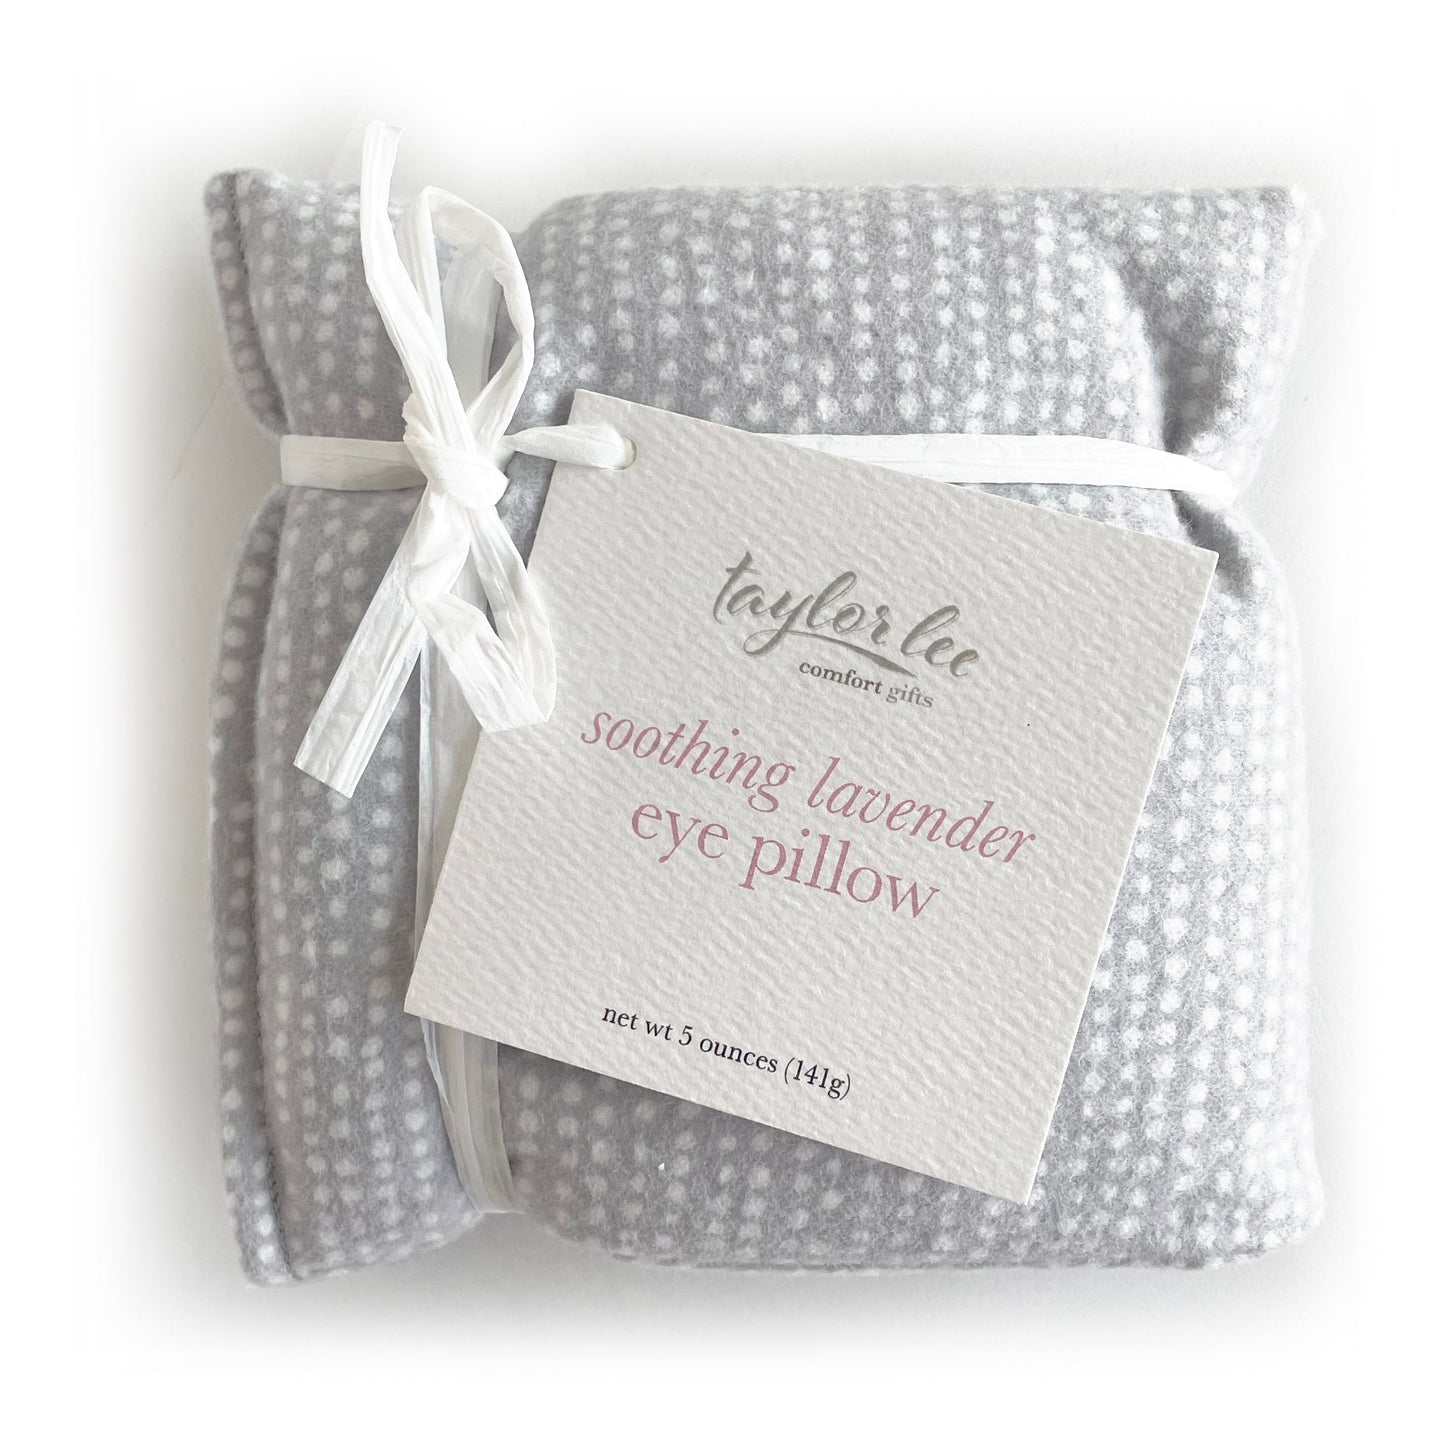 Soothing Lavender Aromatherapy Hot or Cold Eye Pillow